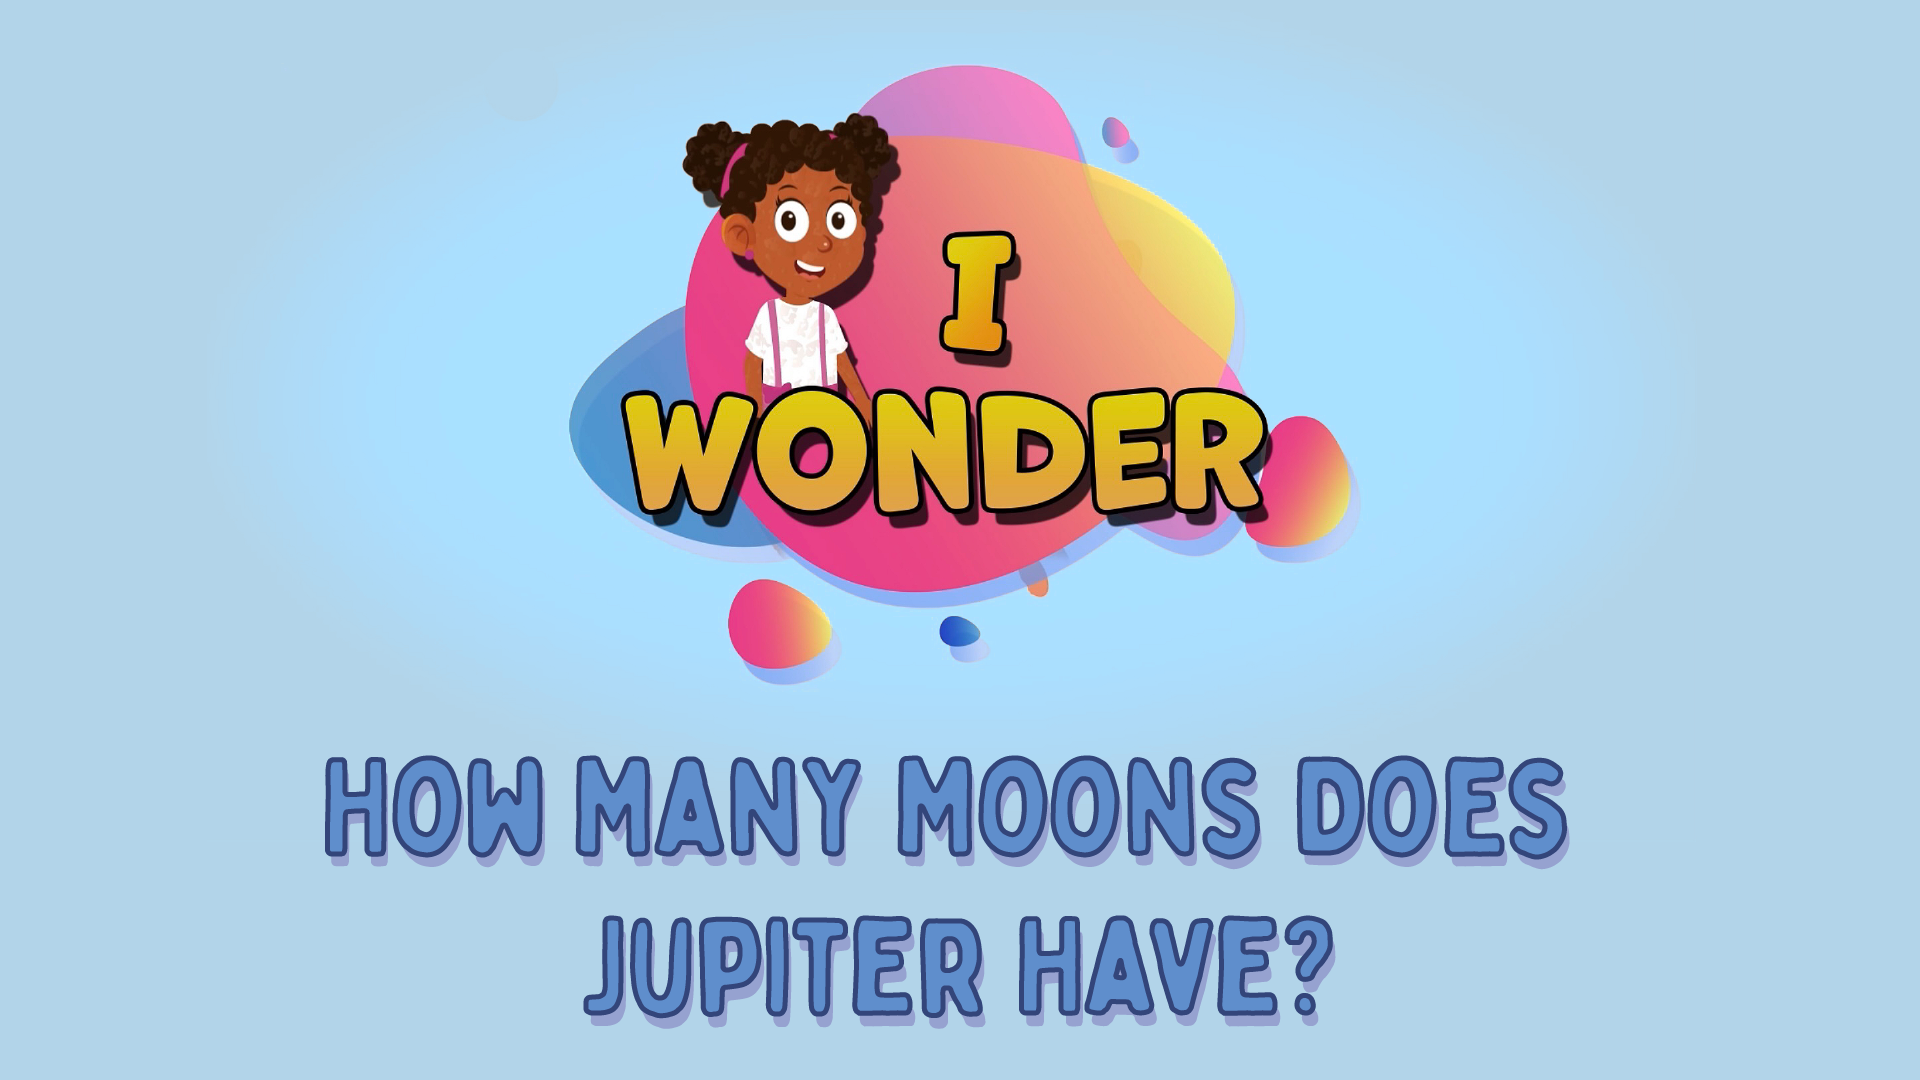 How Many Moons Does Jupiter Have?